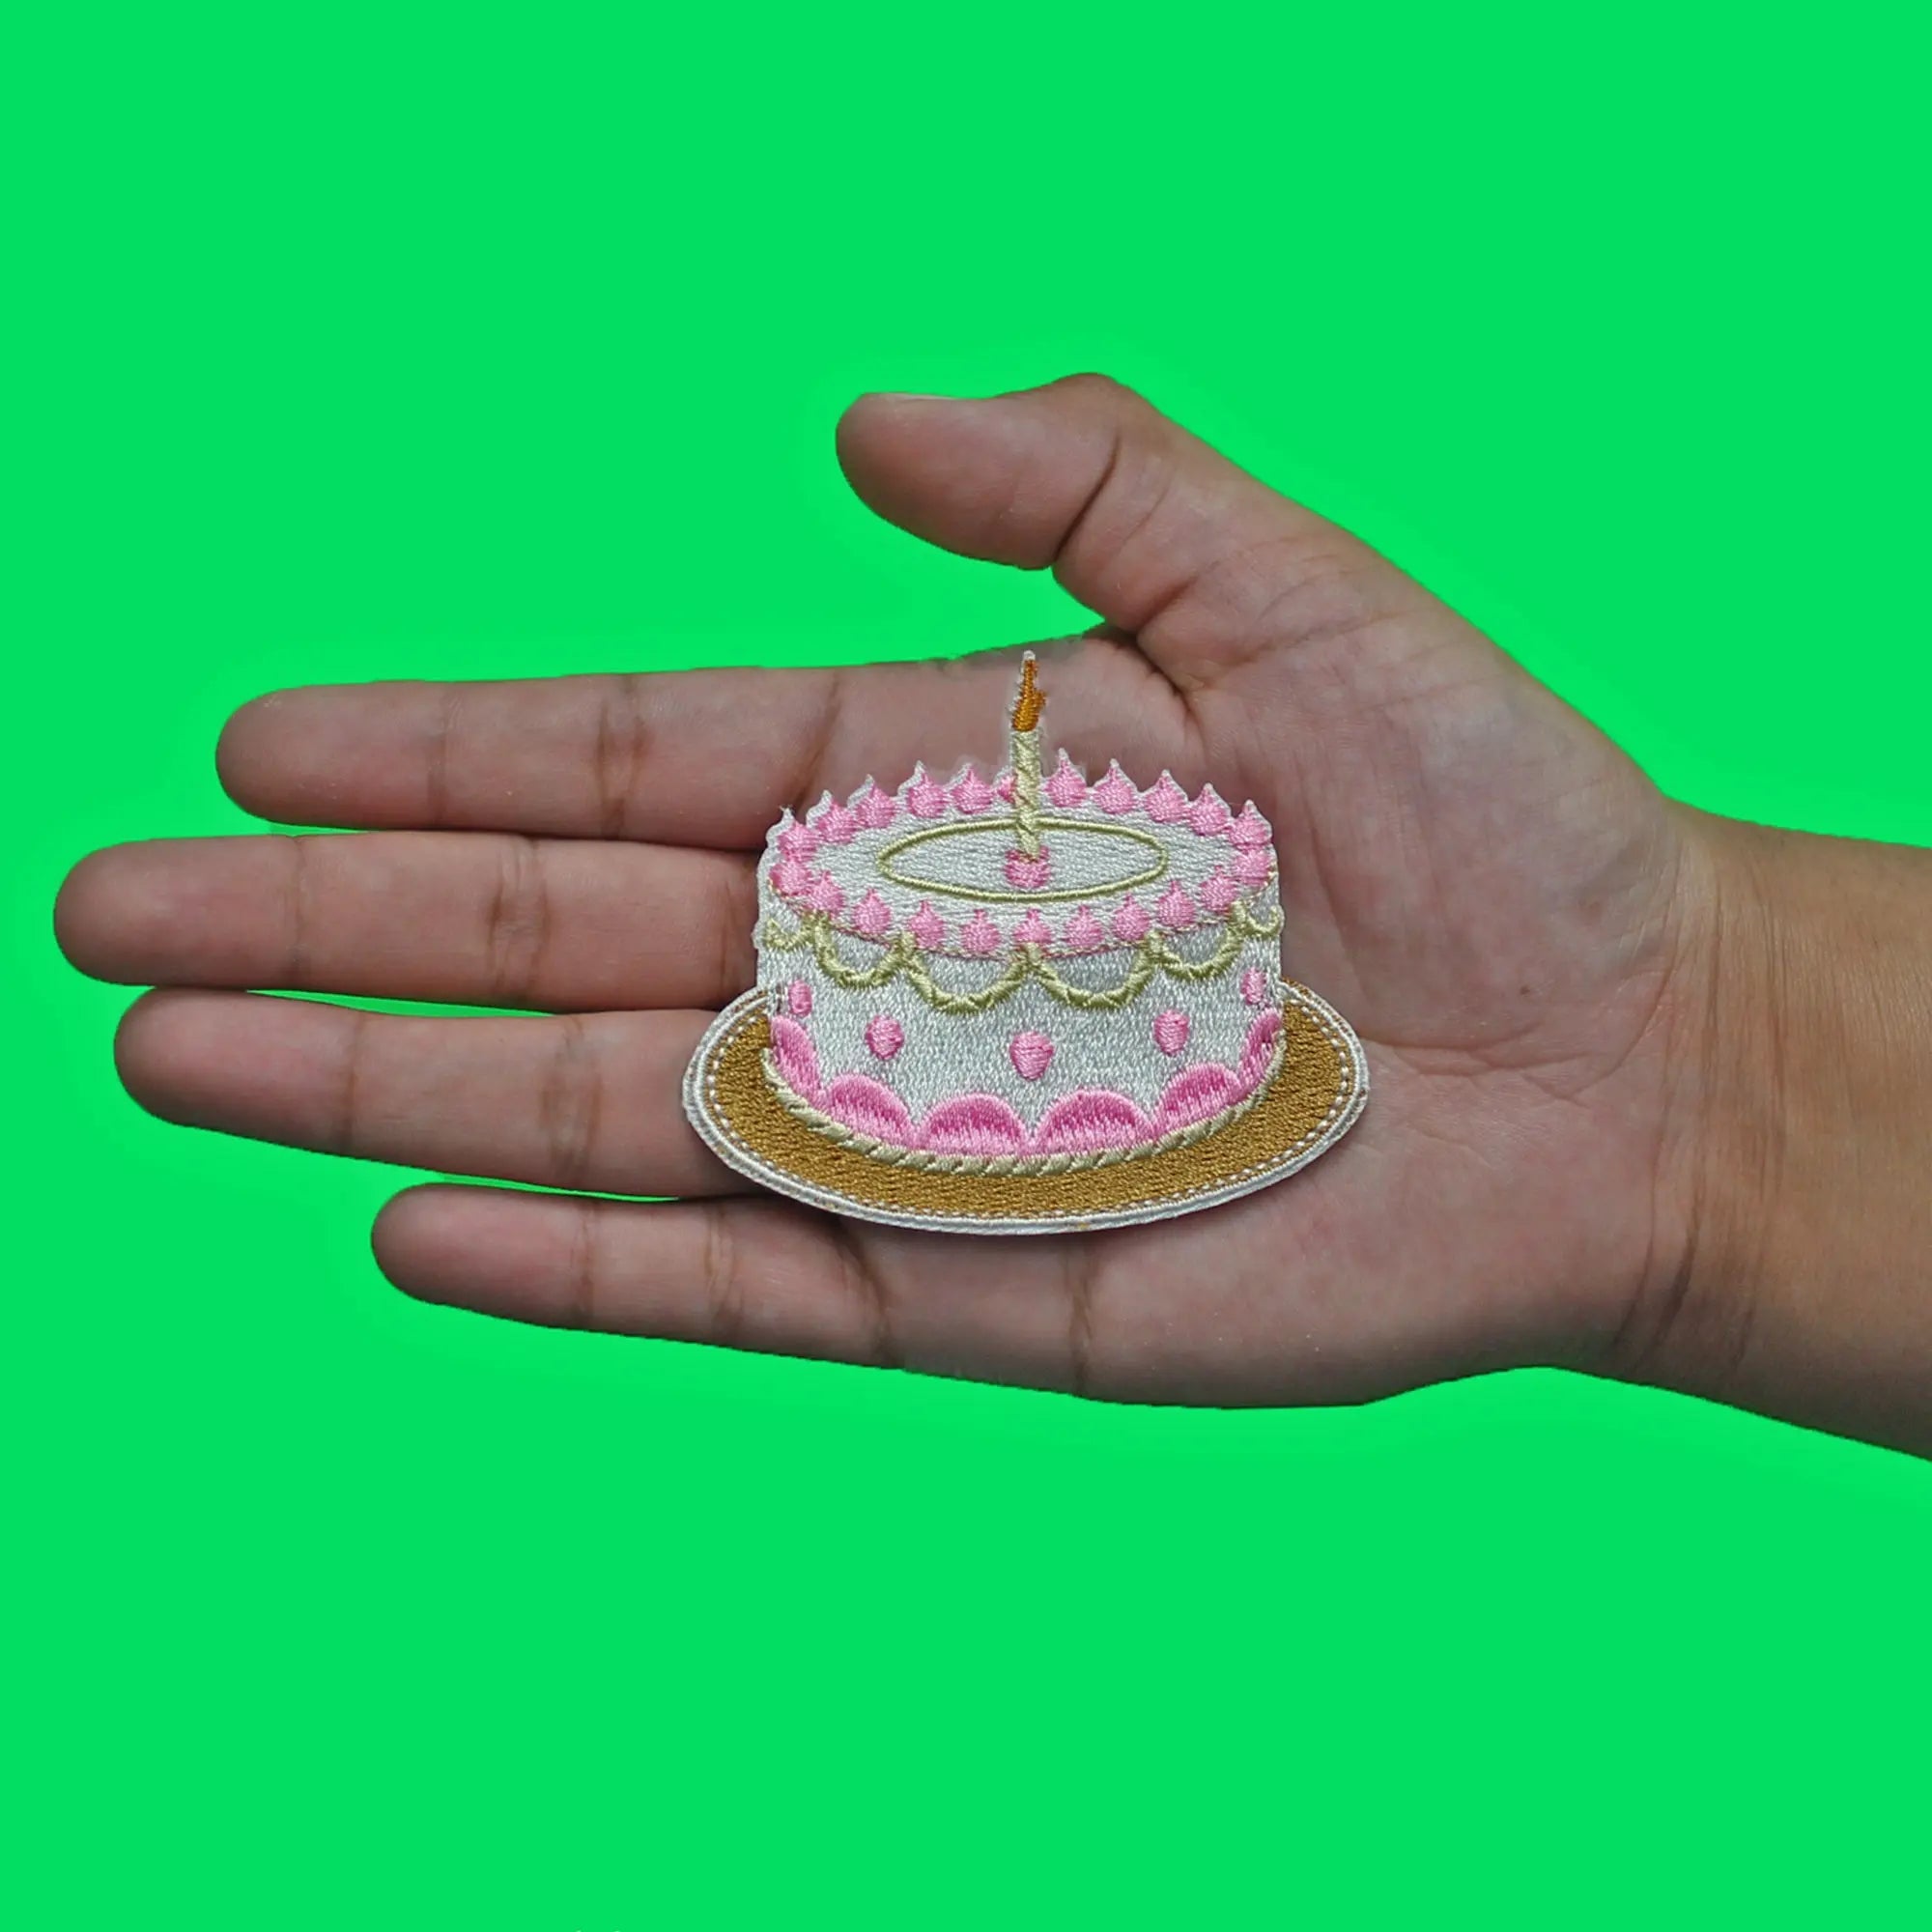 3D Cake Assets Design with Greenscreen Background 25677464 Stock Photo at  Vecteezy